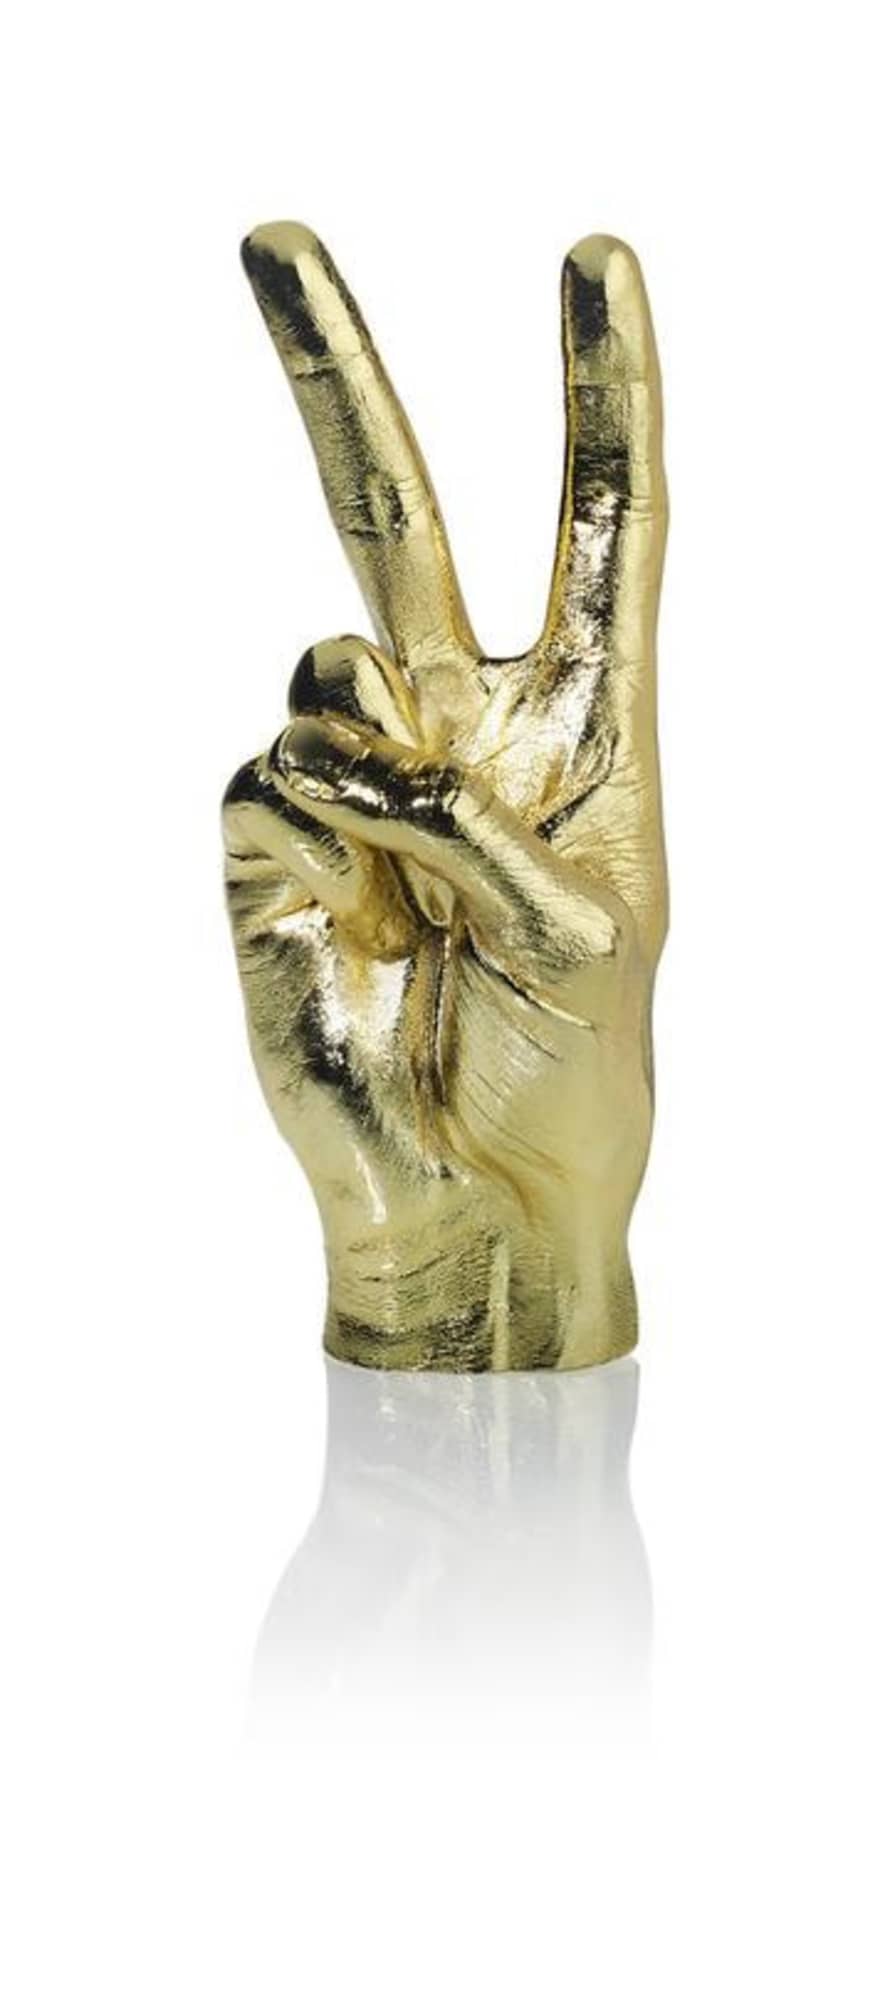 &Quirky Gold Peace Hand Sculpture